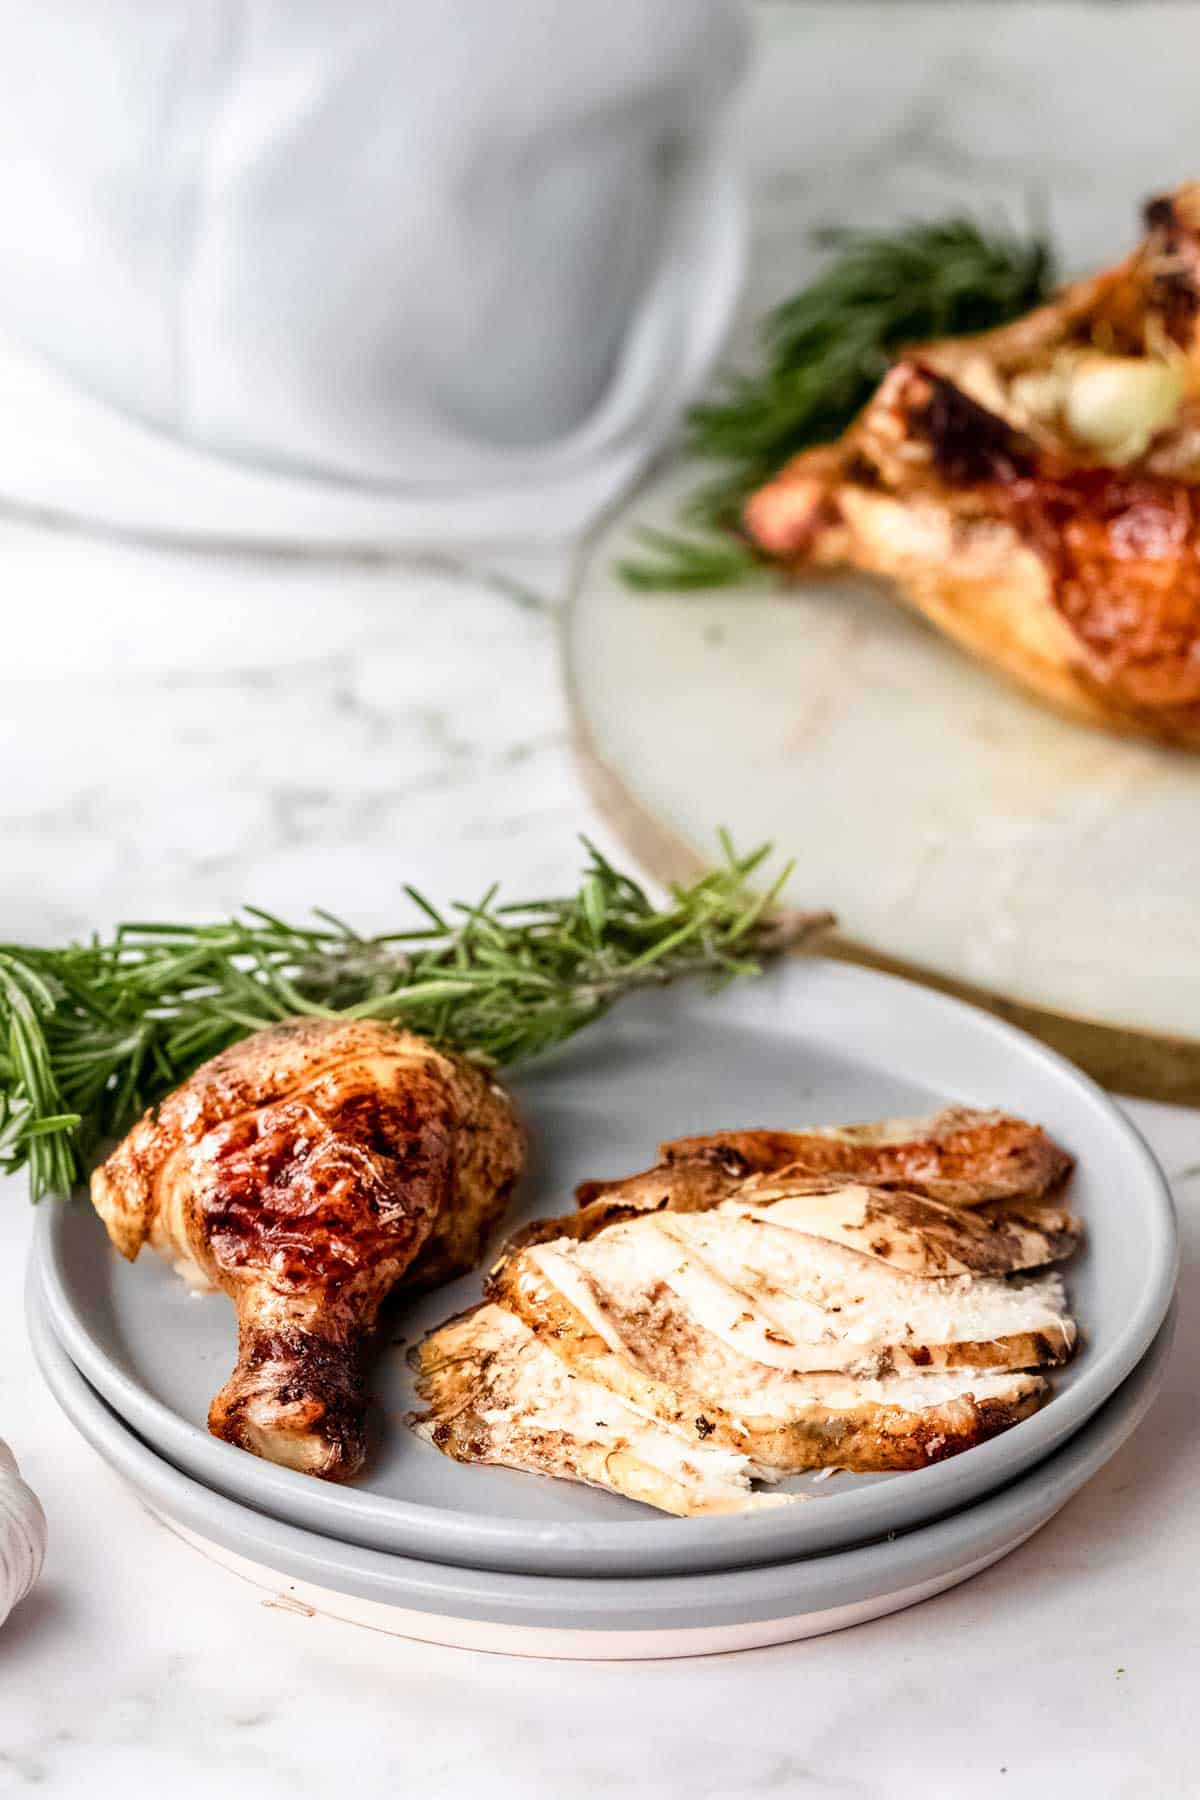 Carved rosemary balsamic roast chicken pieces on a plate next to fresh rosemary sprigs.